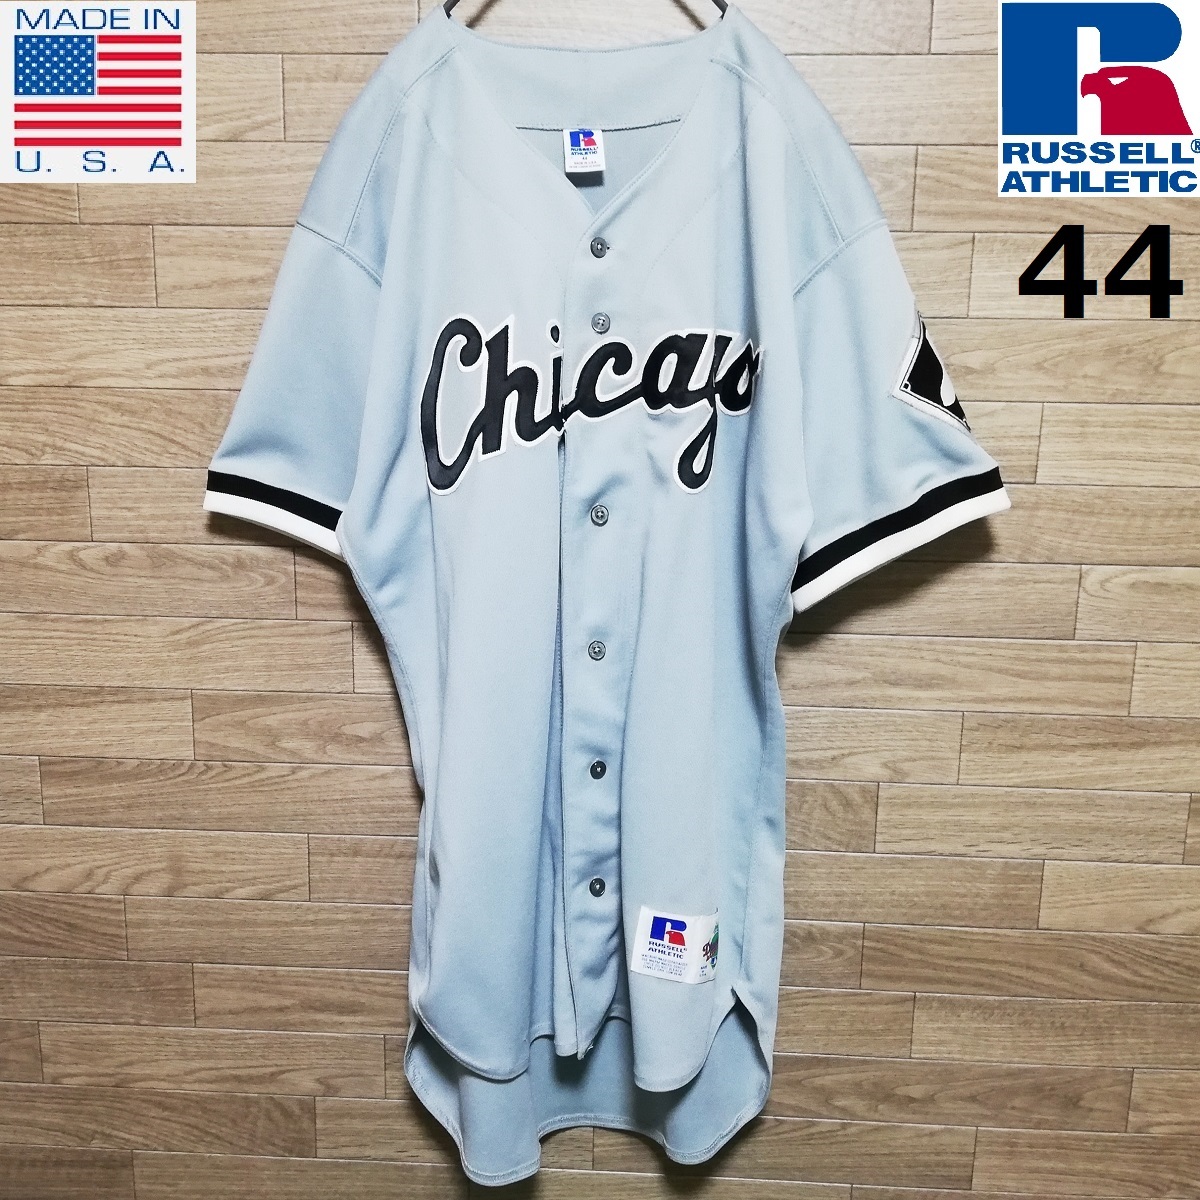 [ translation have ] MLB Chicago white socks USA made authentic diamond collection uniform jersey 44 RUSSELL russell 